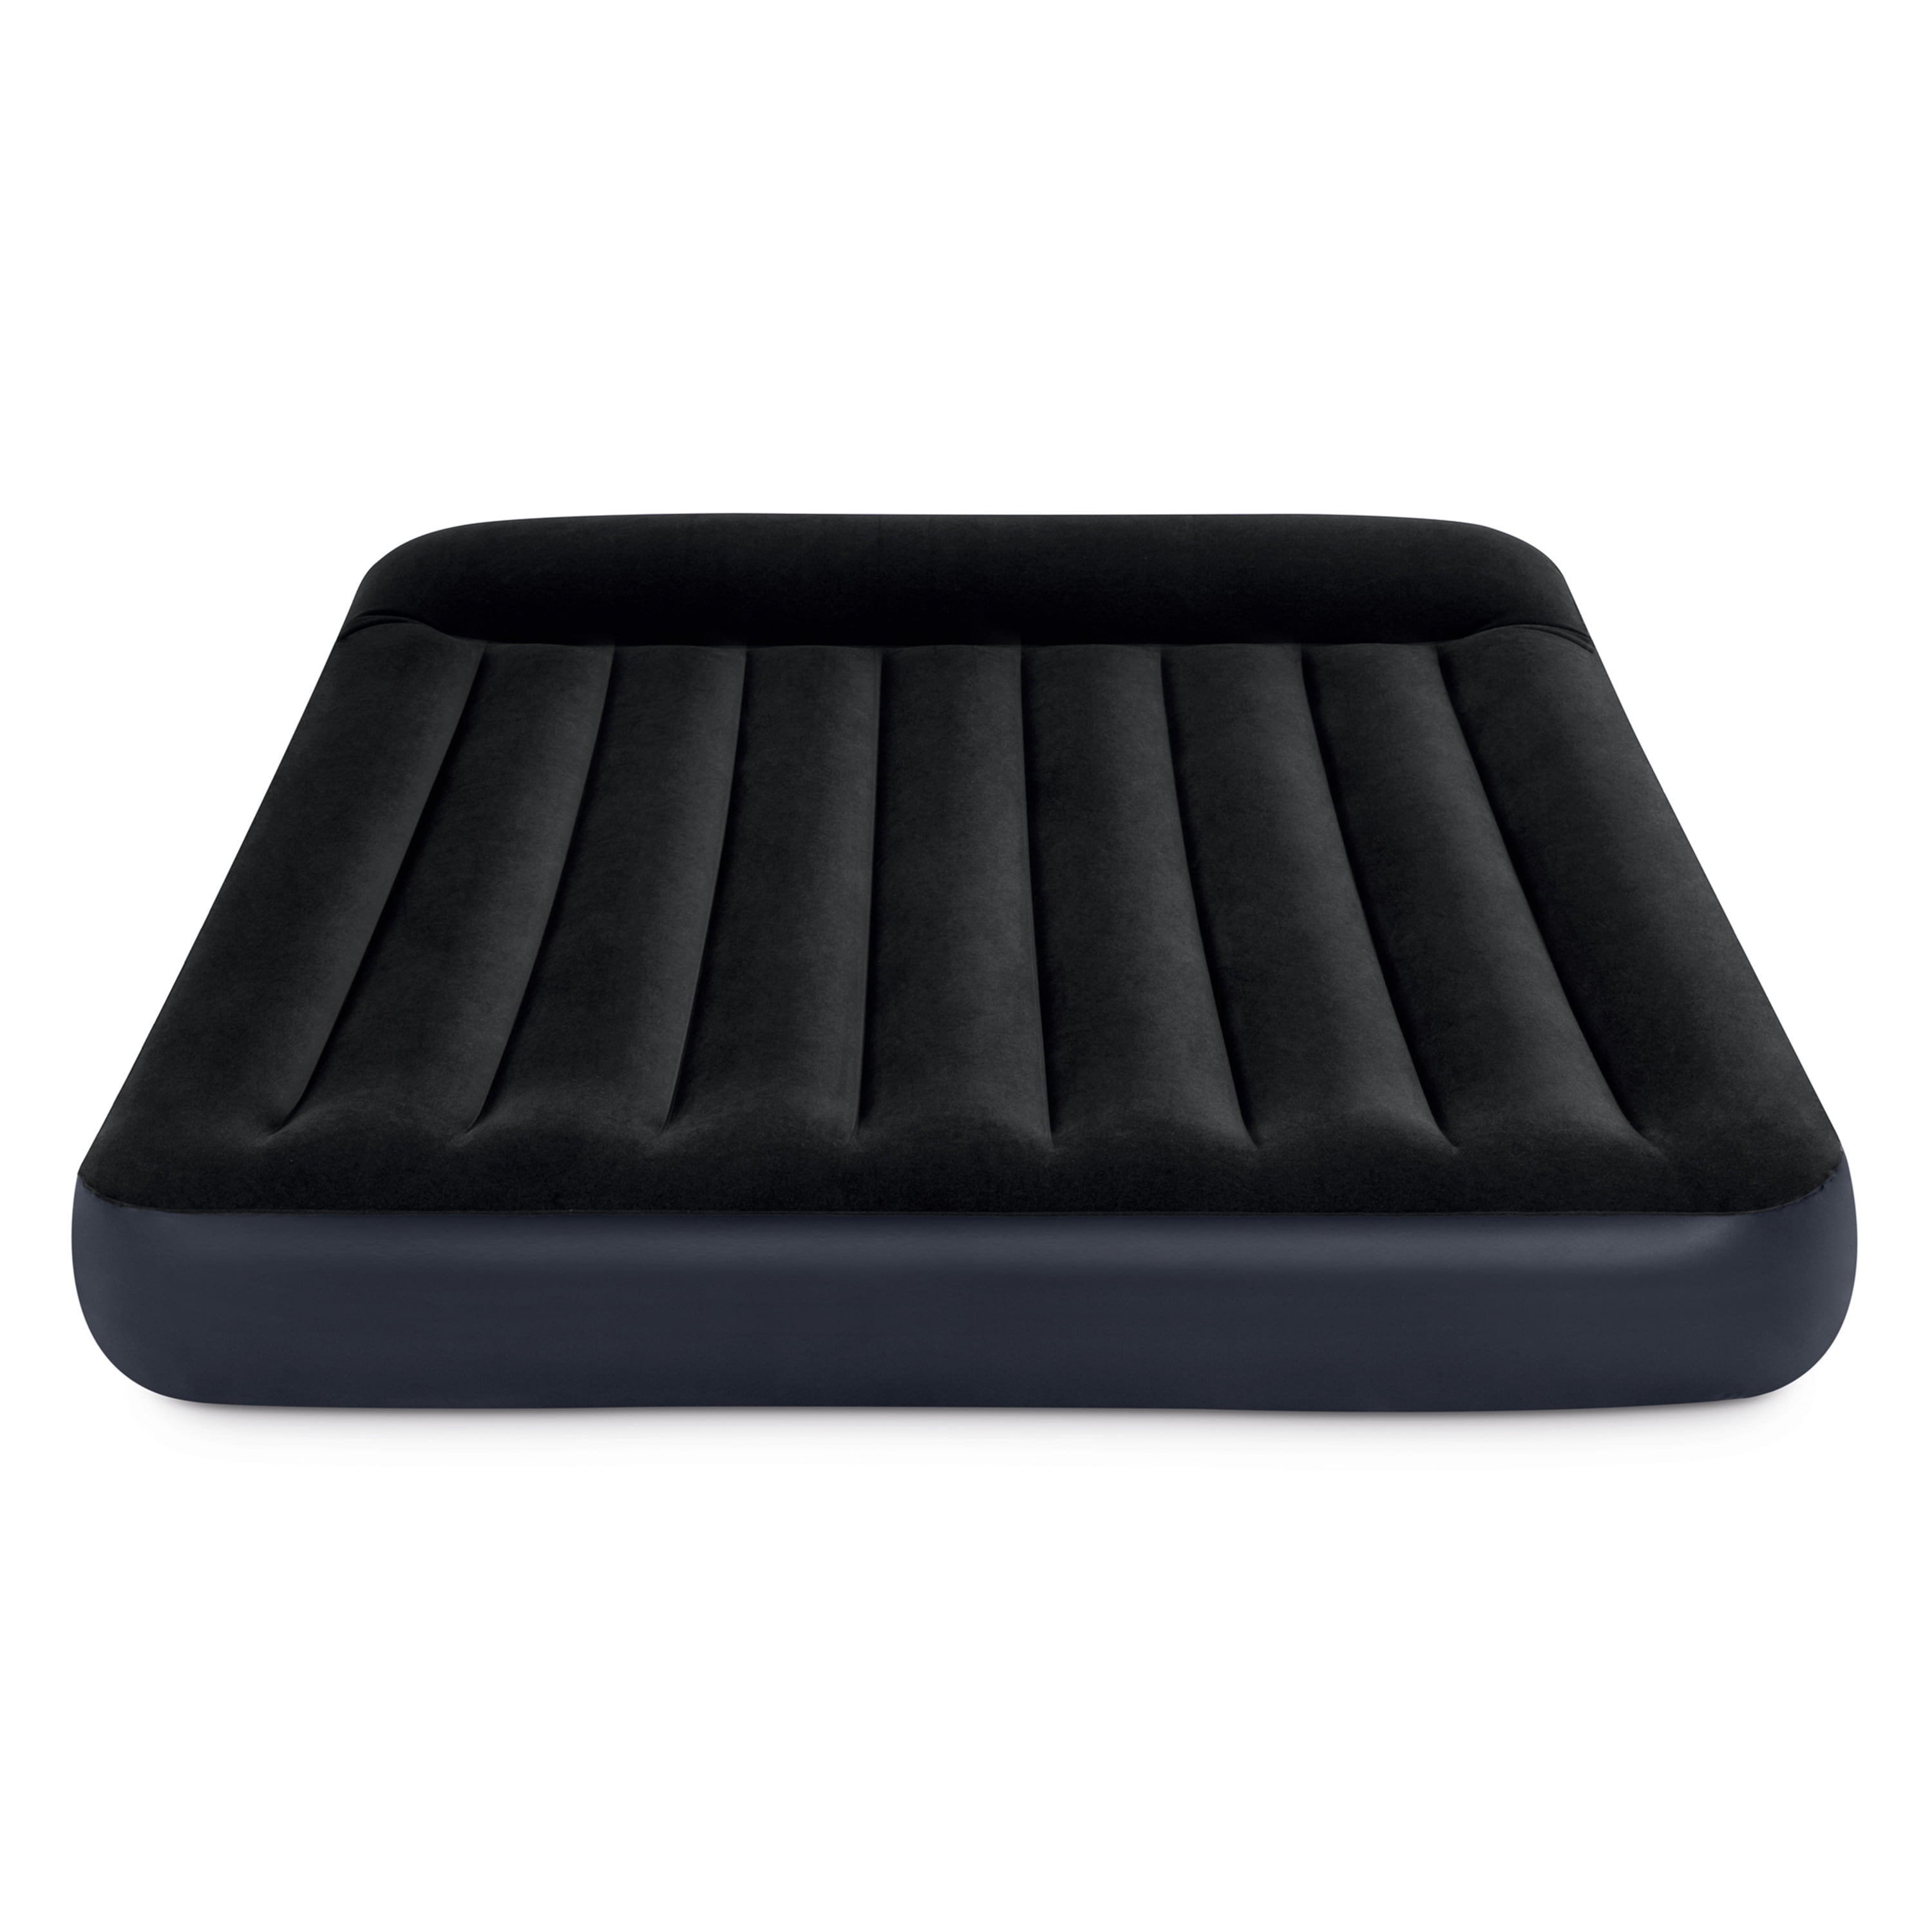 2 Pack Pump Intex Classic Inflatable Full Airbed With Built In Pillow Rest 